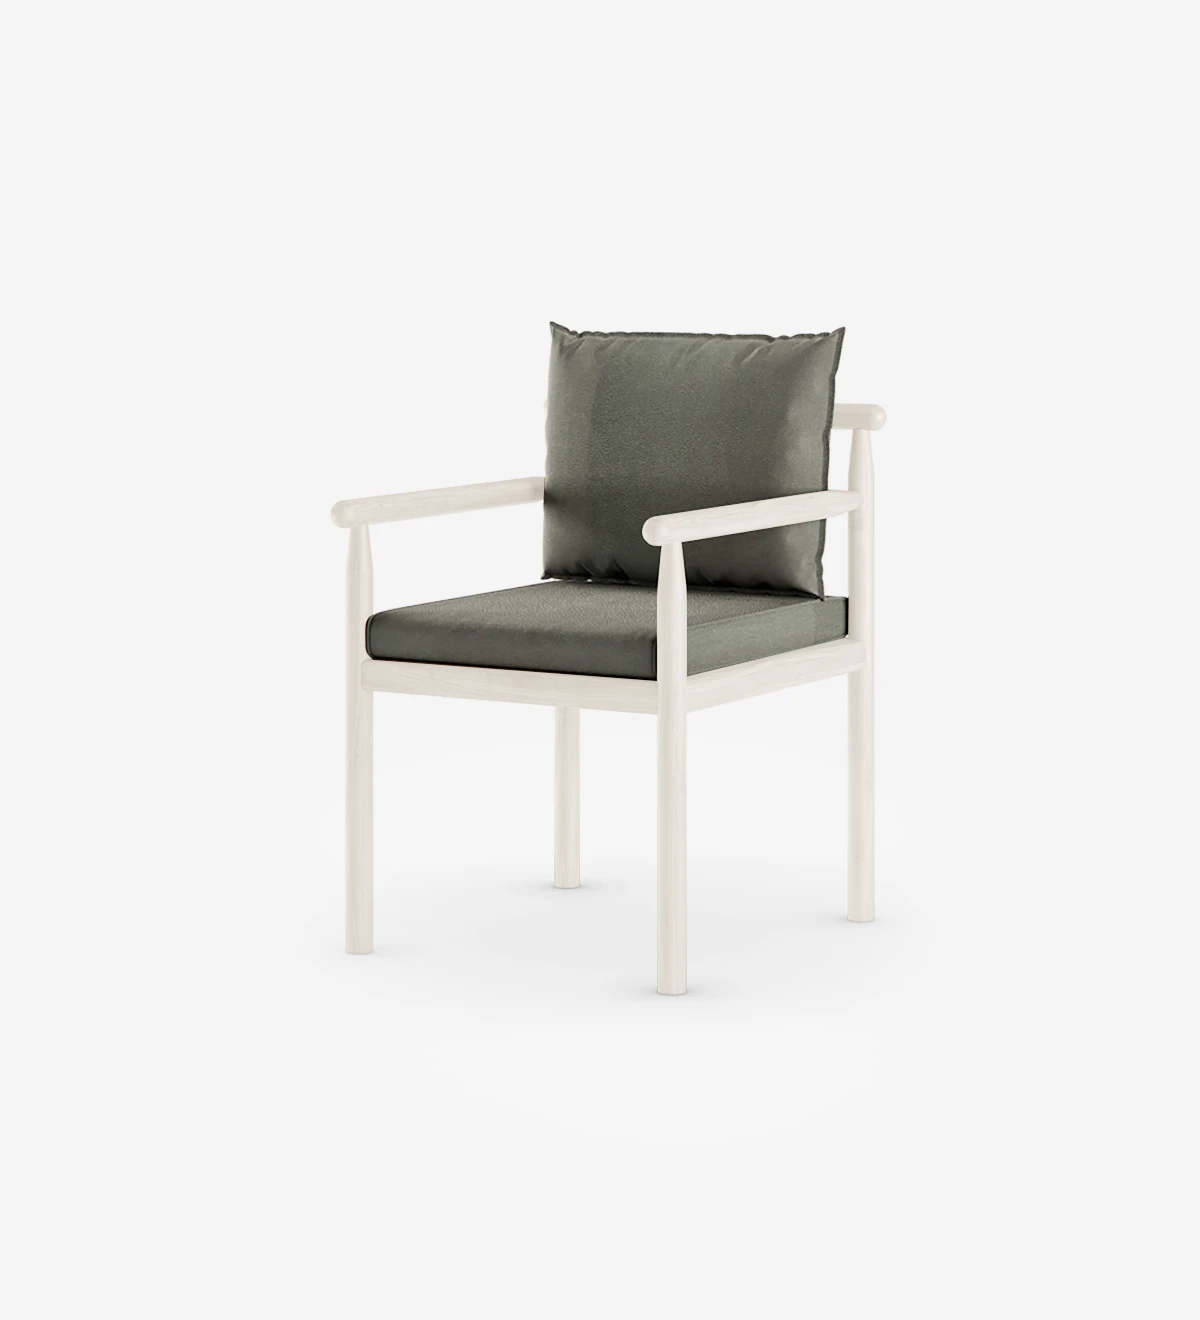 Chair with arms, fabric upholstered cushions, and pearl lacquered structure.